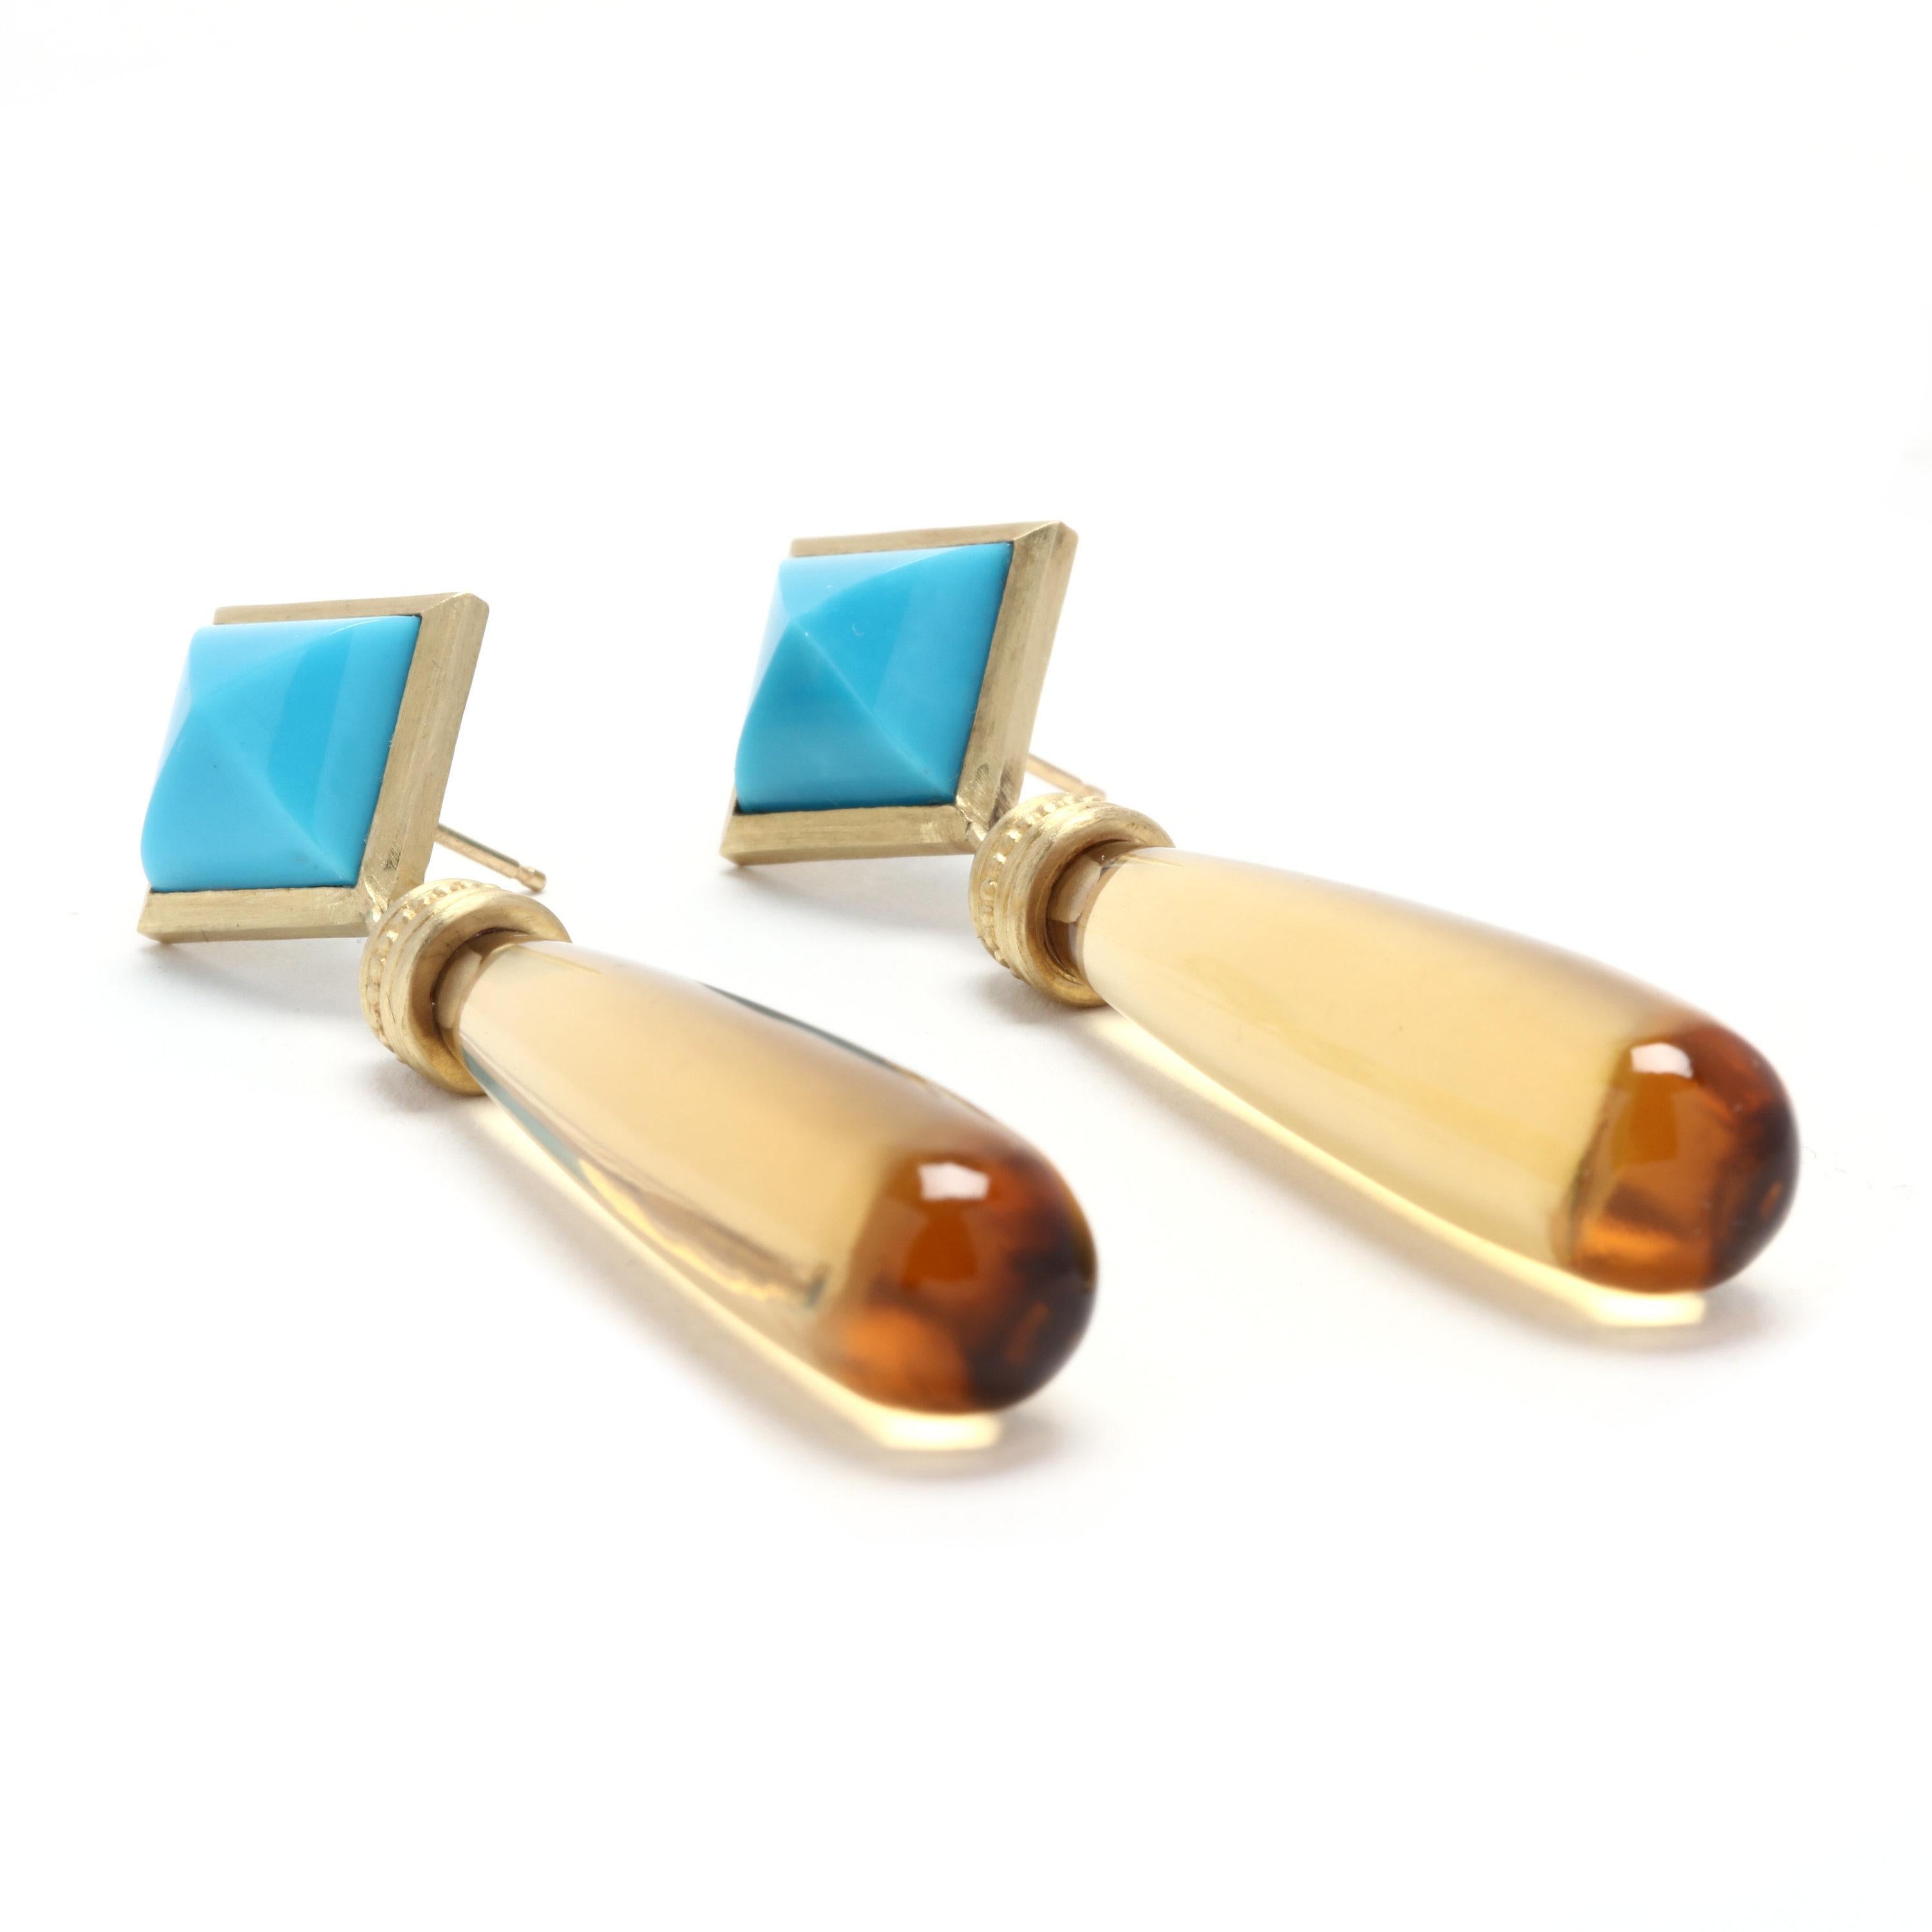 A pair of 14 karat yellow gold, turquoise and citrine dangle earrings. These earrings feature bezel set pyramidal turquoise stones set en pointe, each suspending an oblong tear shape citrine stone and with pierced push backs.

Stones:
- turquoise, 2